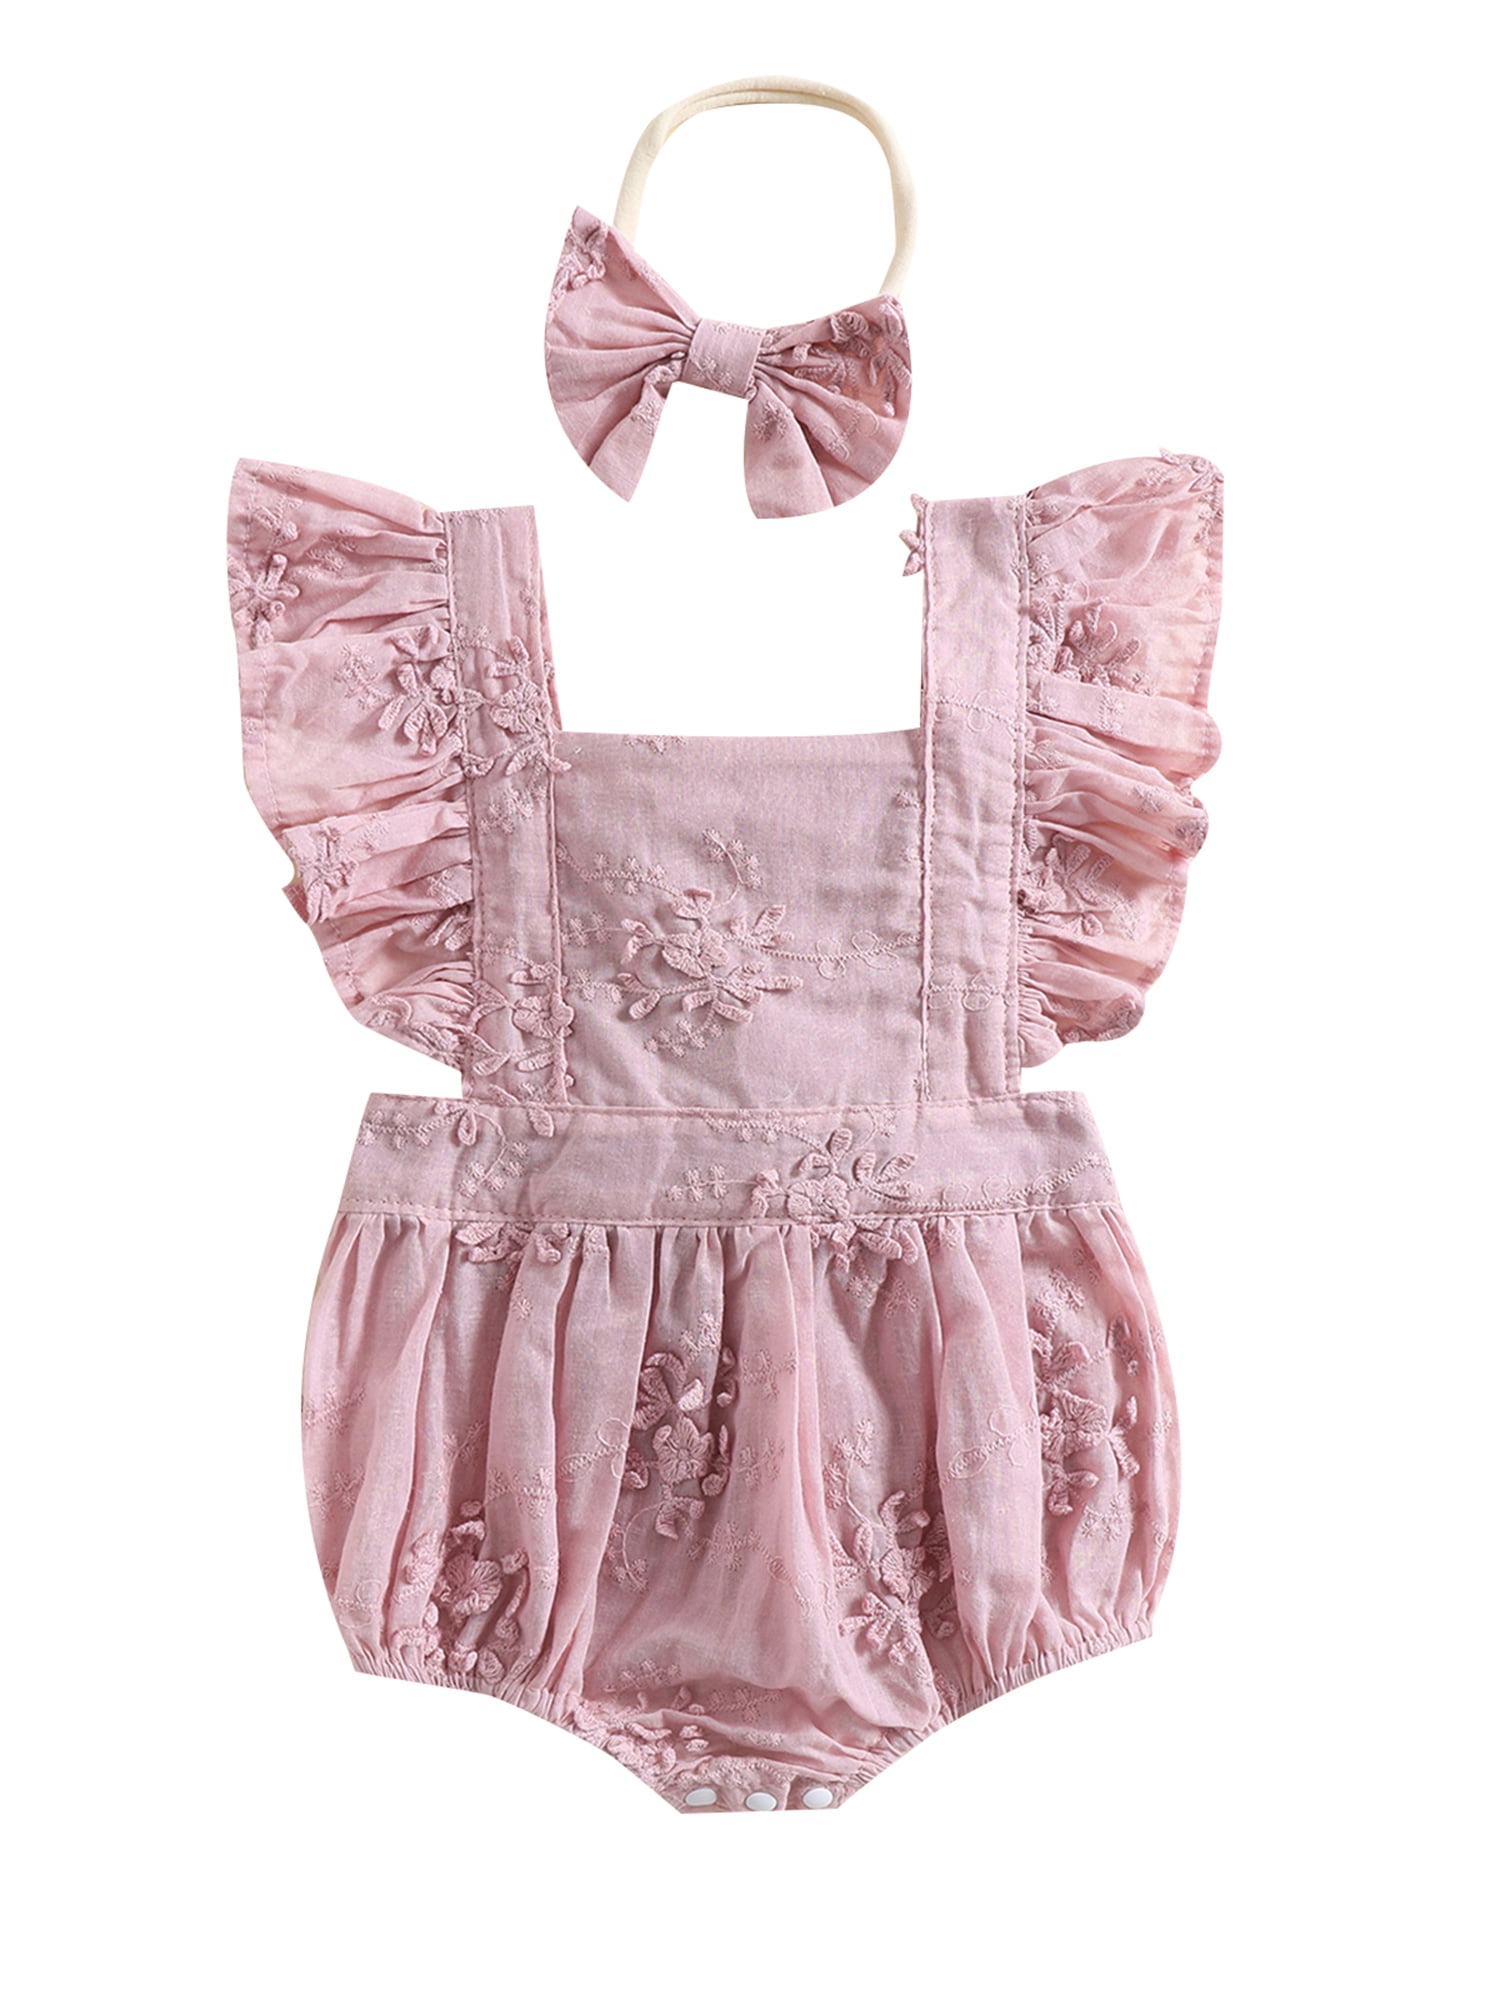 Summer Baby Girls Romper 2pcs Ruffles Fly Sleeve Floral Lace Jumpsuits ...